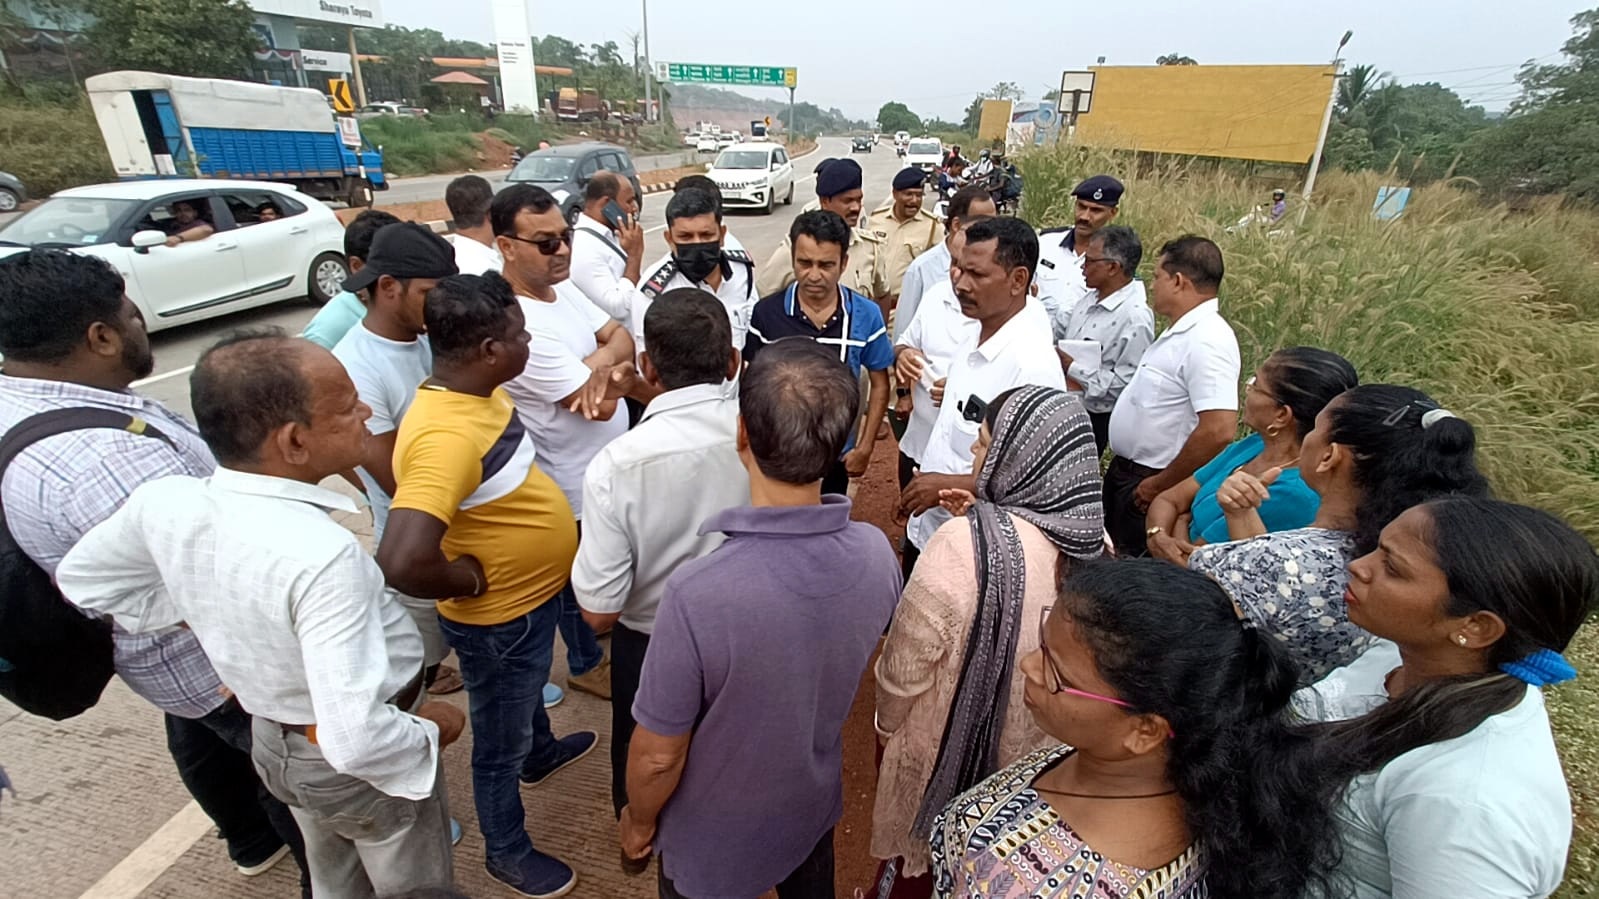 PWD suggests Service Road to connect villages near Kesarval after joint inspection of accident-prone road